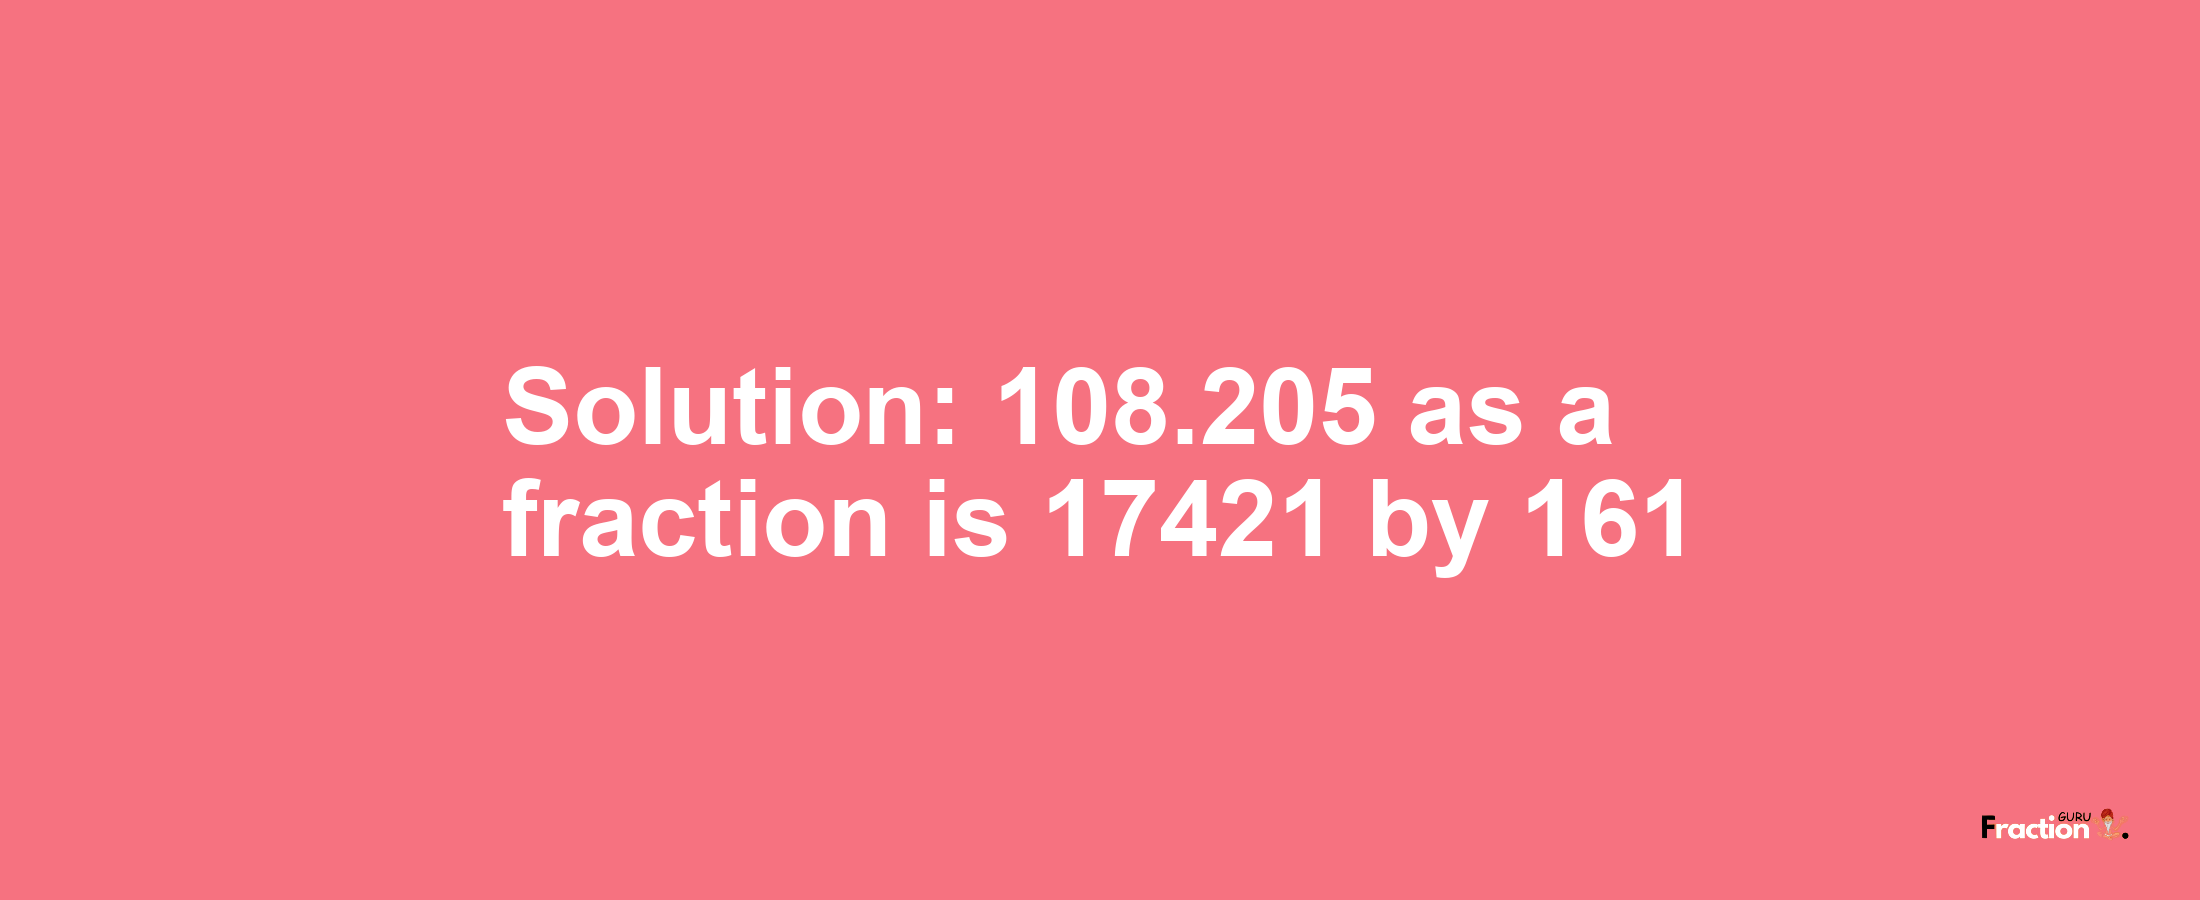 Solution:108.205 as a fraction is 17421/161